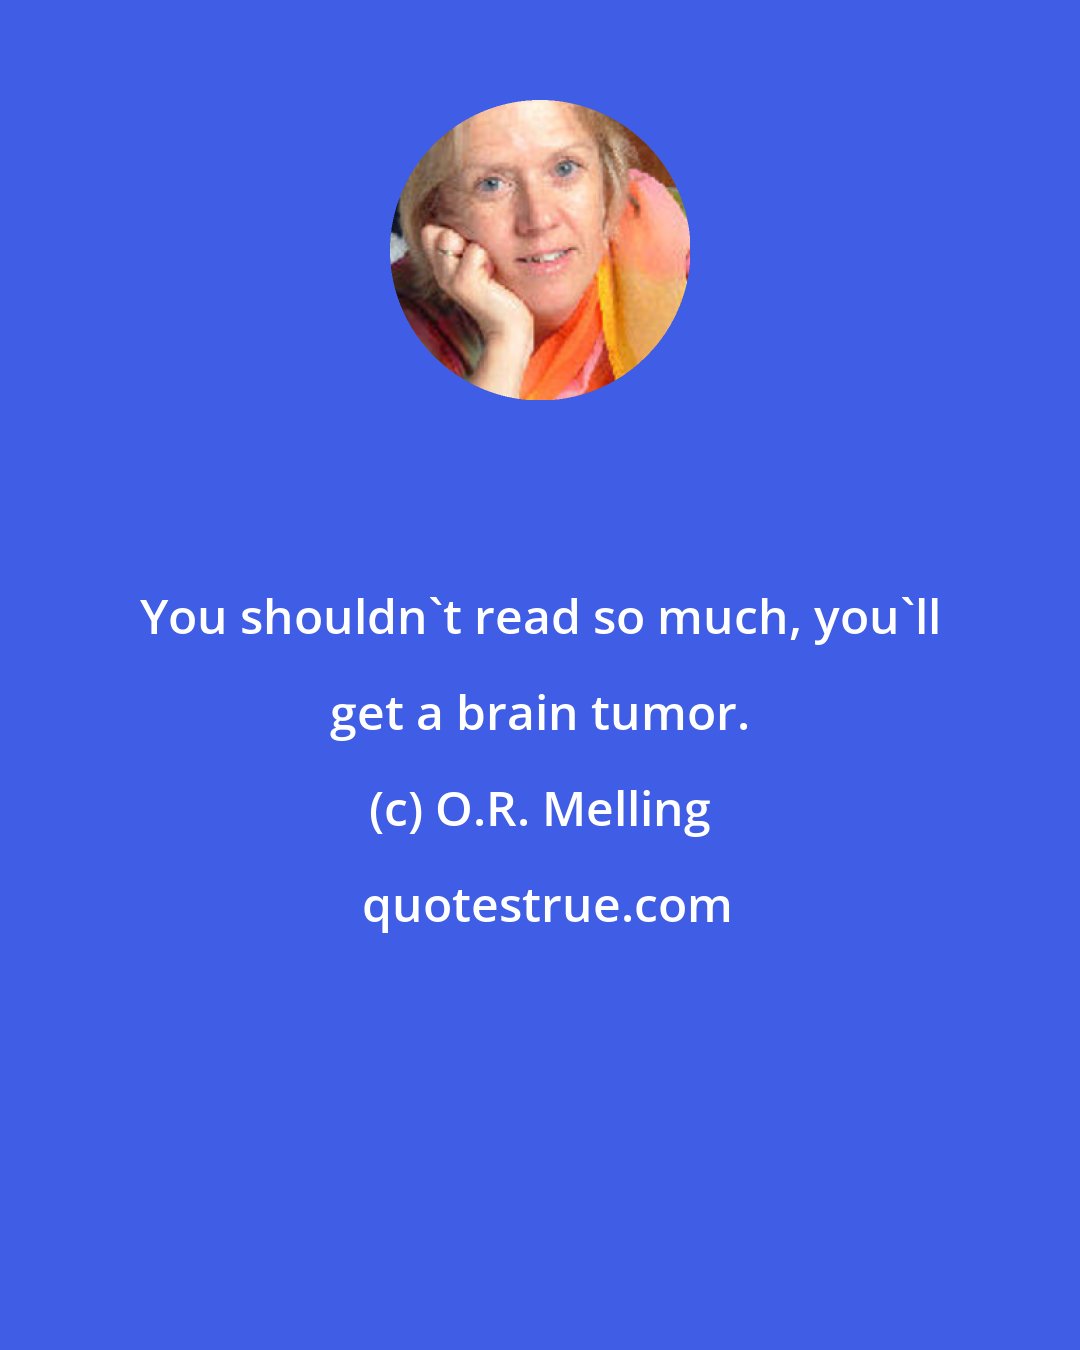 O.R. Melling: You shouldn't read so much, you'll get a brain tumor.